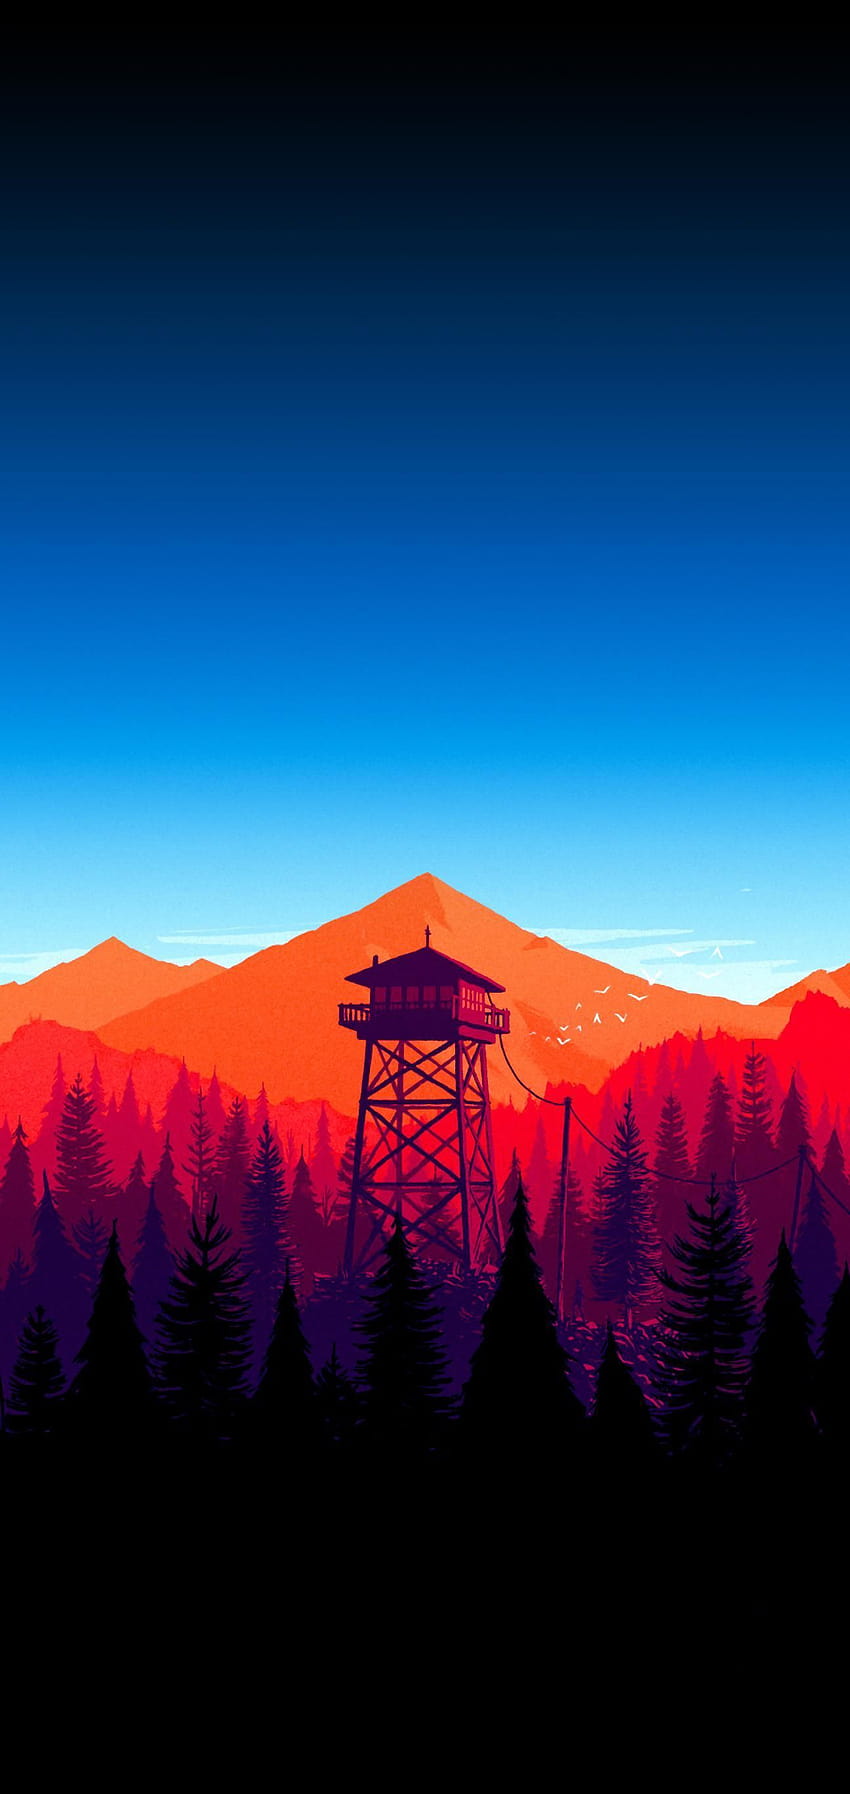 Firewatch also makes for an awesome in 2020, mobile minimal amoled HD phone wallpaper